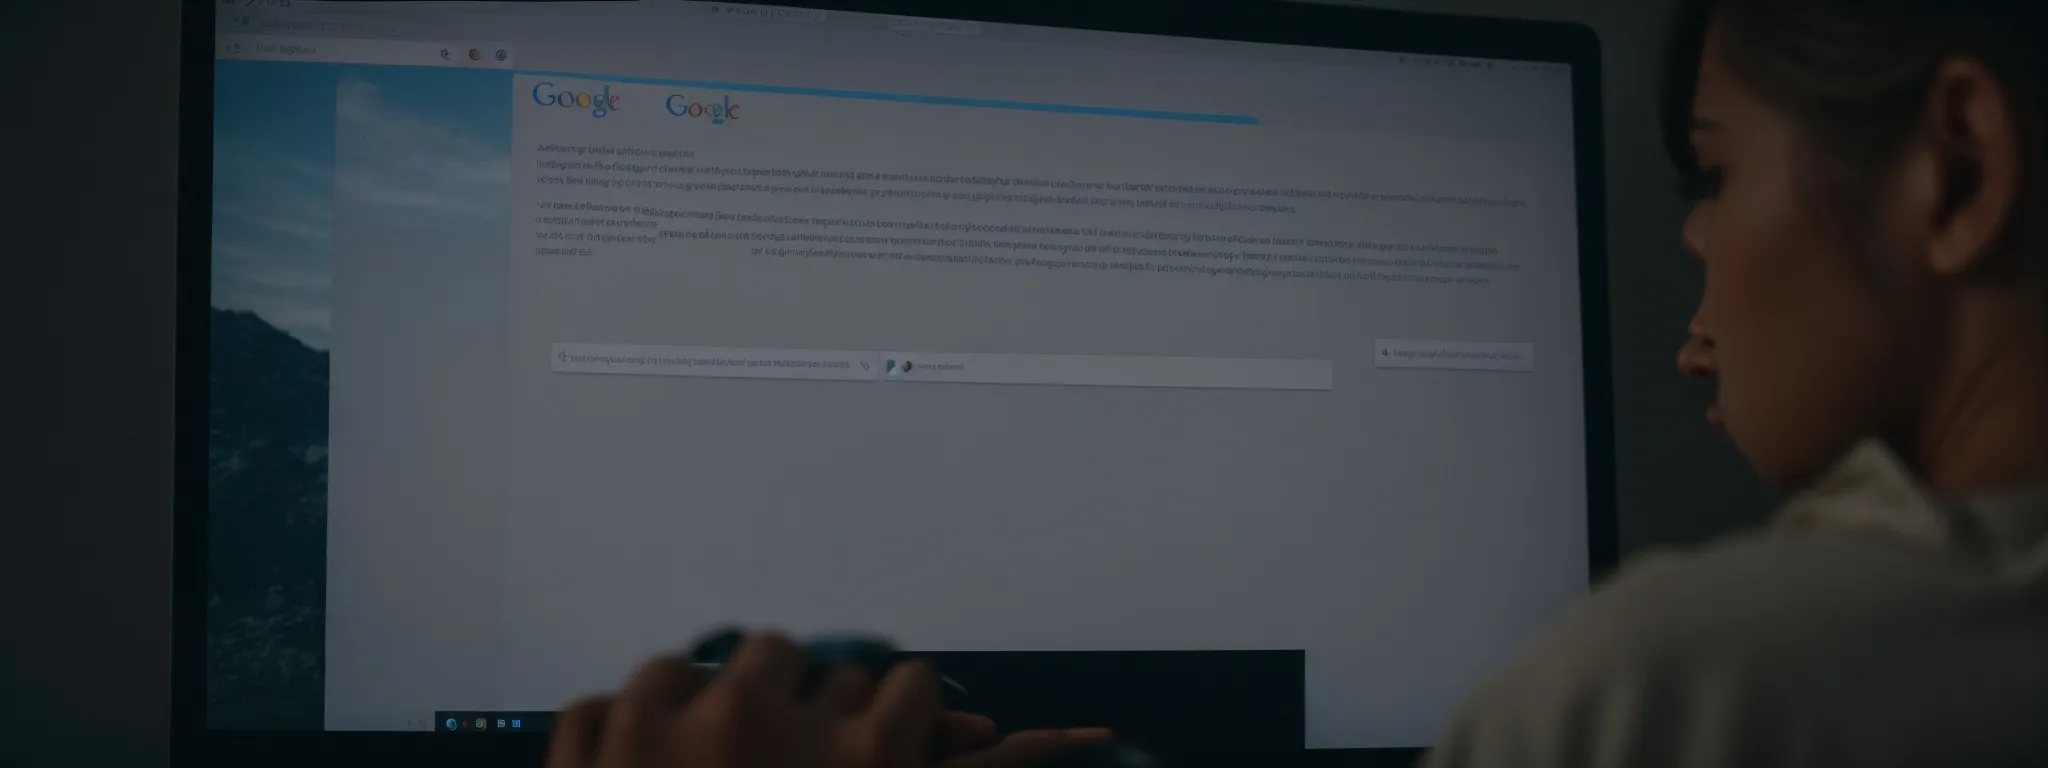 a person gazes at a brightly lit computer screen displaying an open google search bar with suggestive text dropdown.